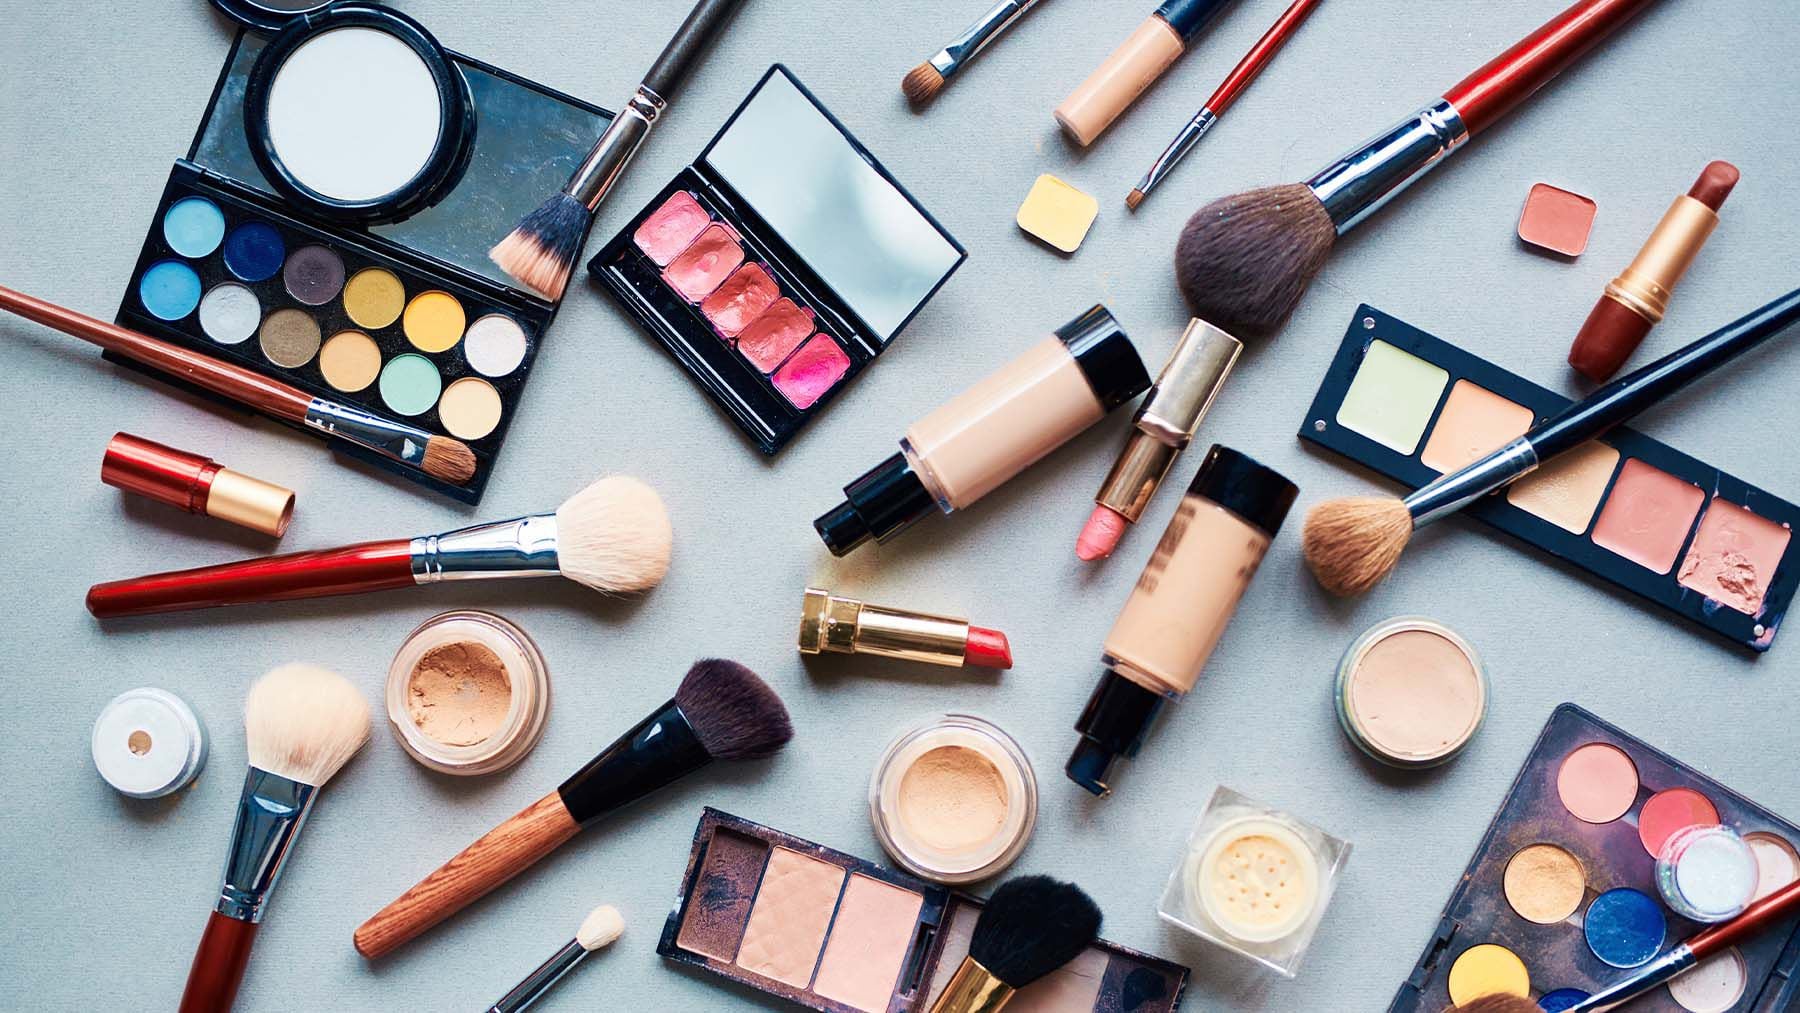 The Thinking Behind Beauty’s Latest M&A Wave